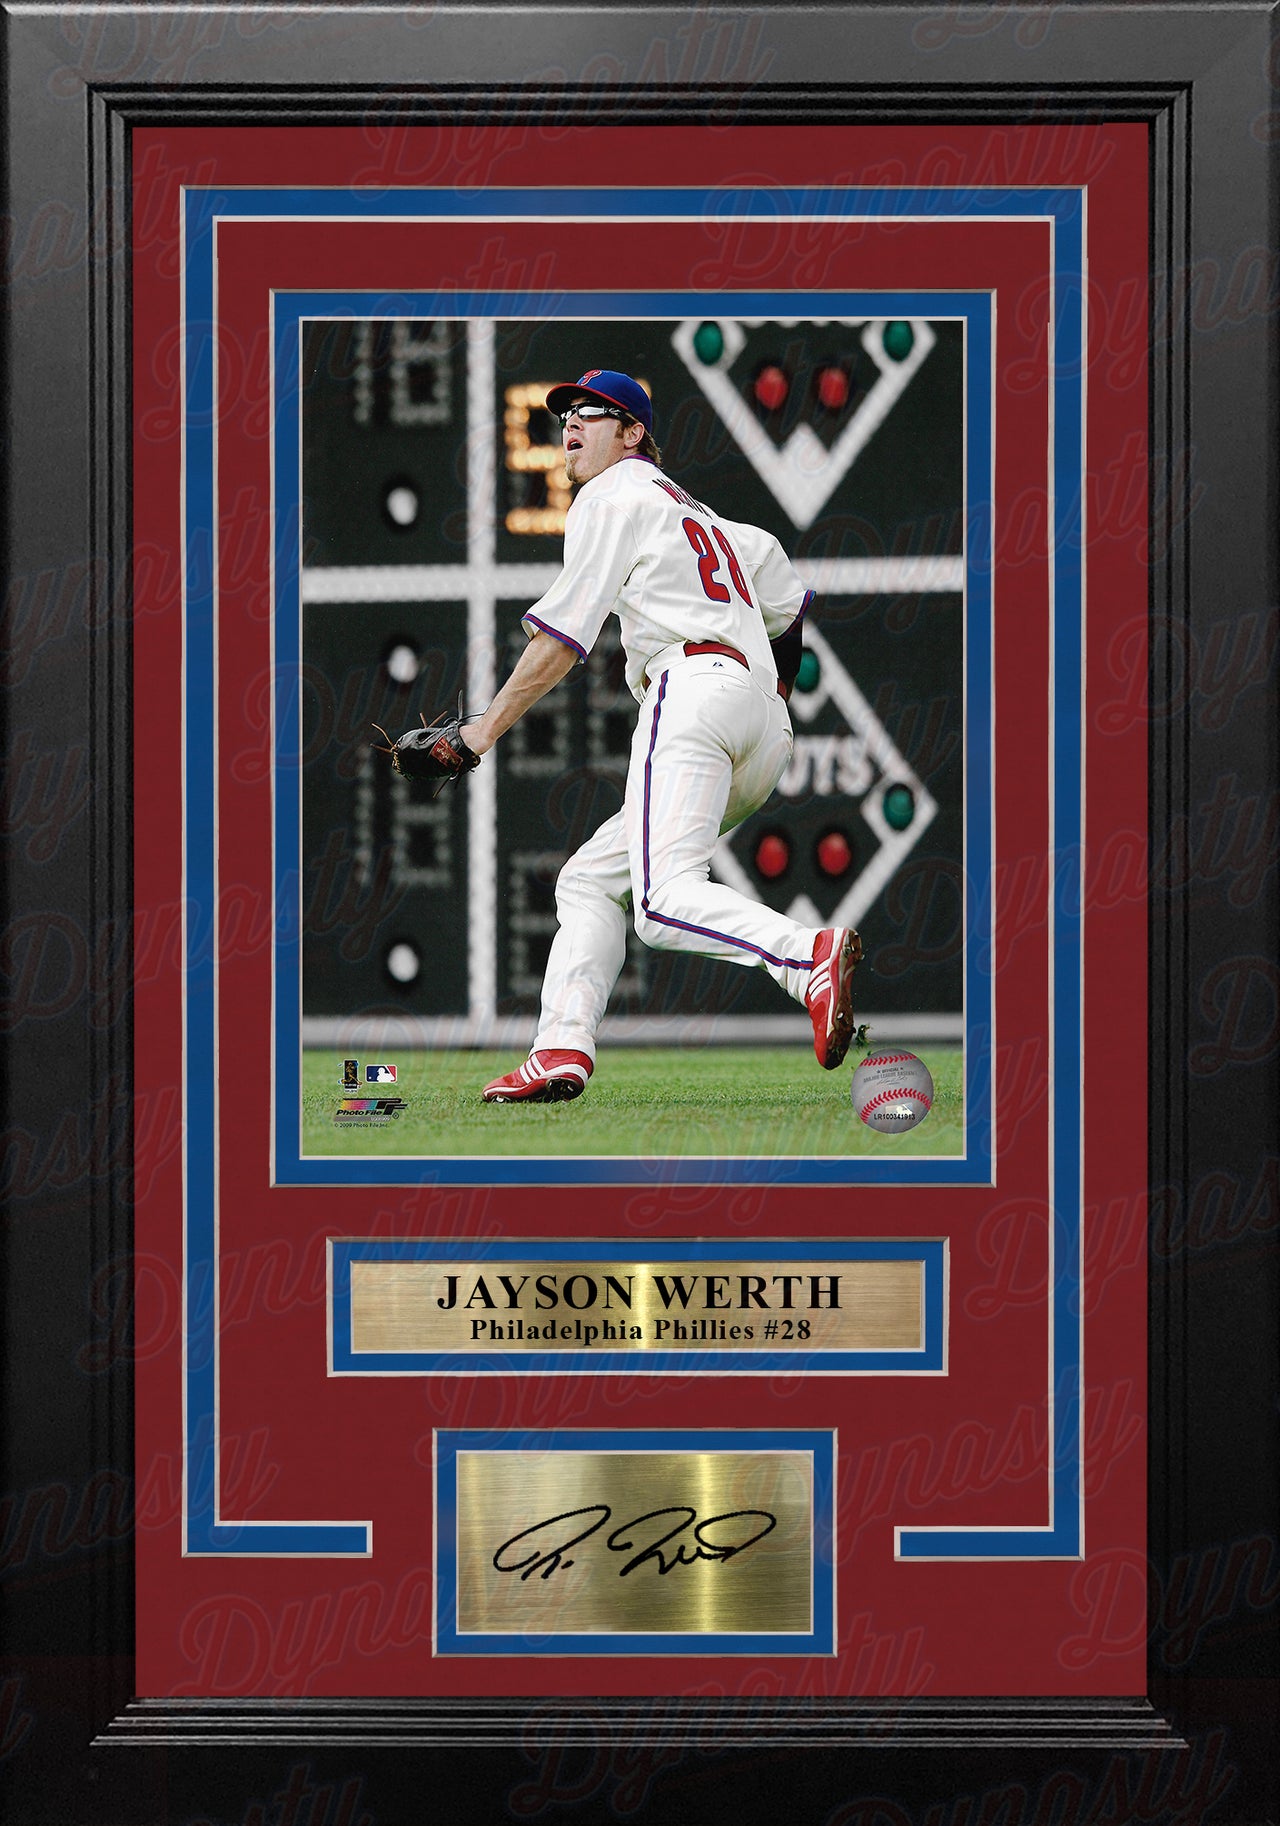 Jayson Werth in Action Philadelphia Phillies 8" x 10" Framed Baseball Photo with Engraved Autograph - Dynasty Sports & Framing 